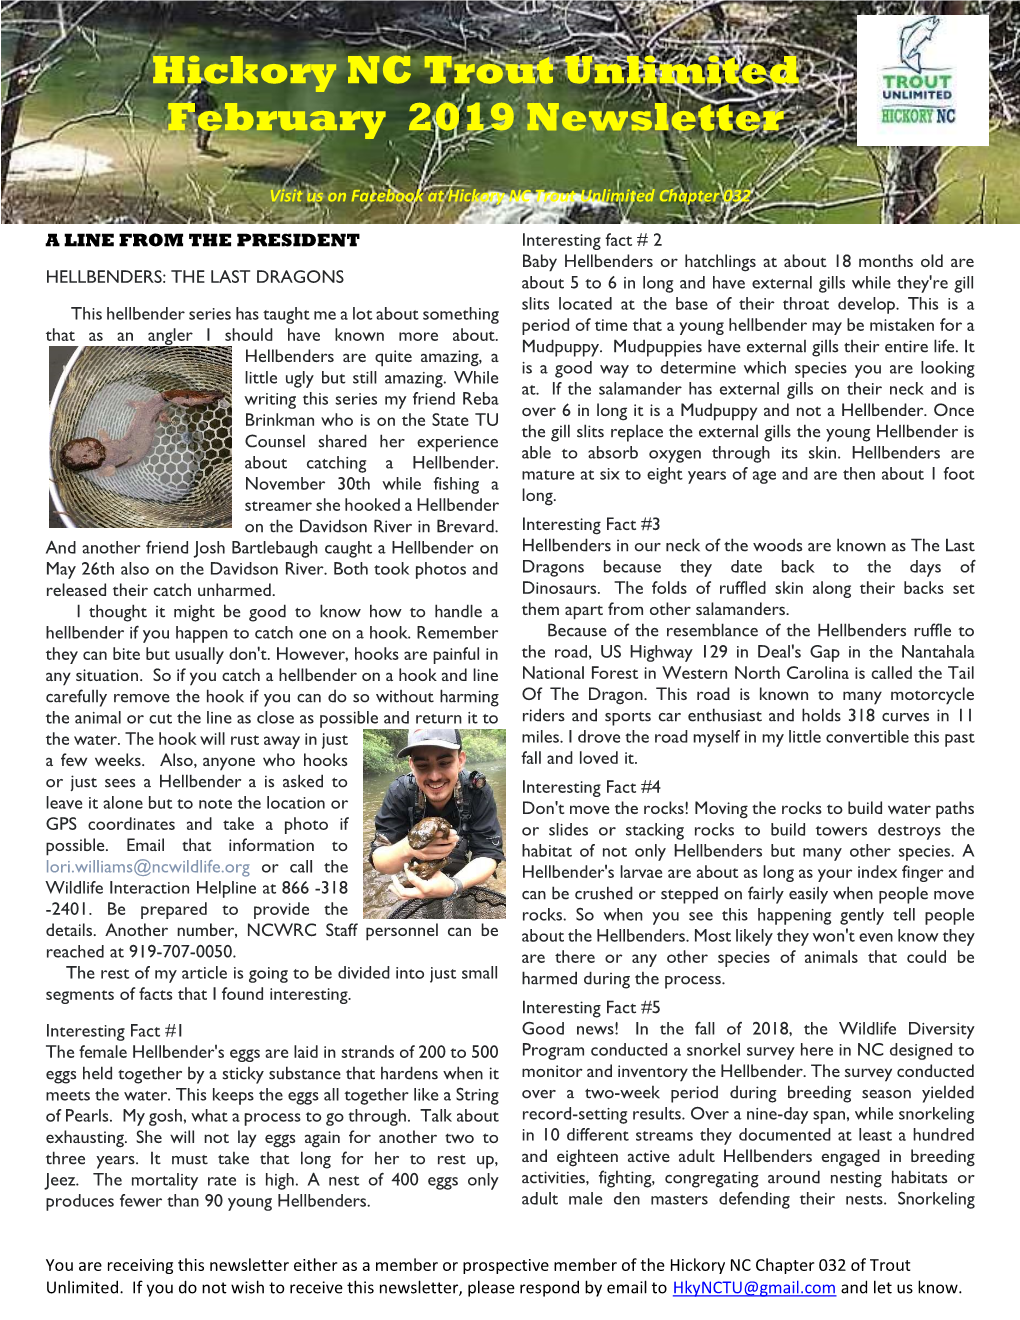 Hickory NC Trout Unlimited February 2019 Newsletter